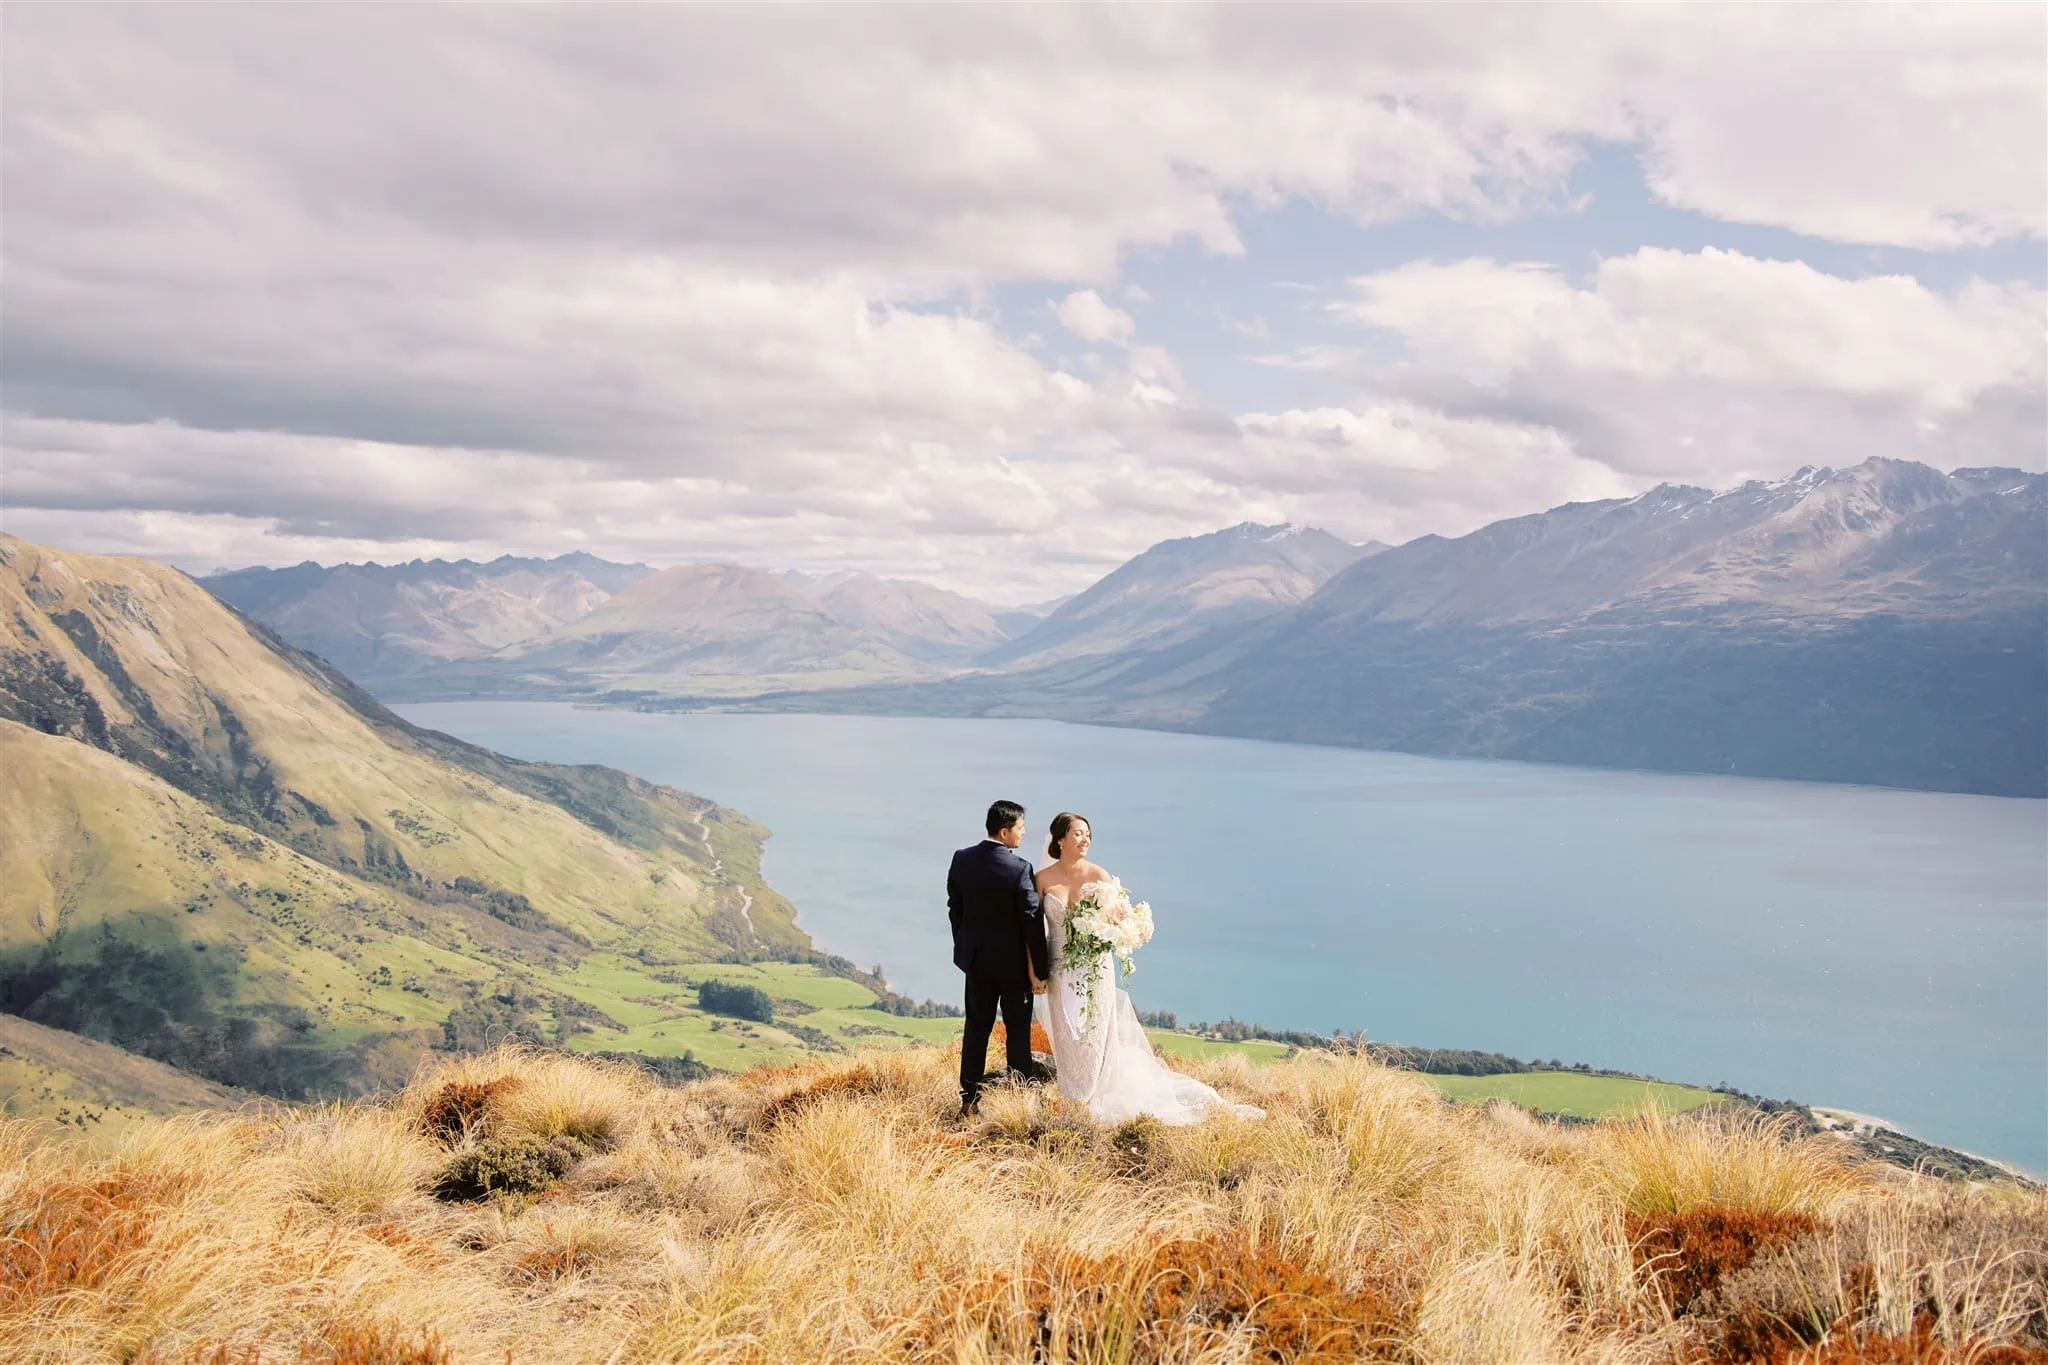 Queenstown Elopement Heli Wedding Photographer クイーンズタウン結婚式 | Mariah and a man standing on a cliff with mountains in the background.